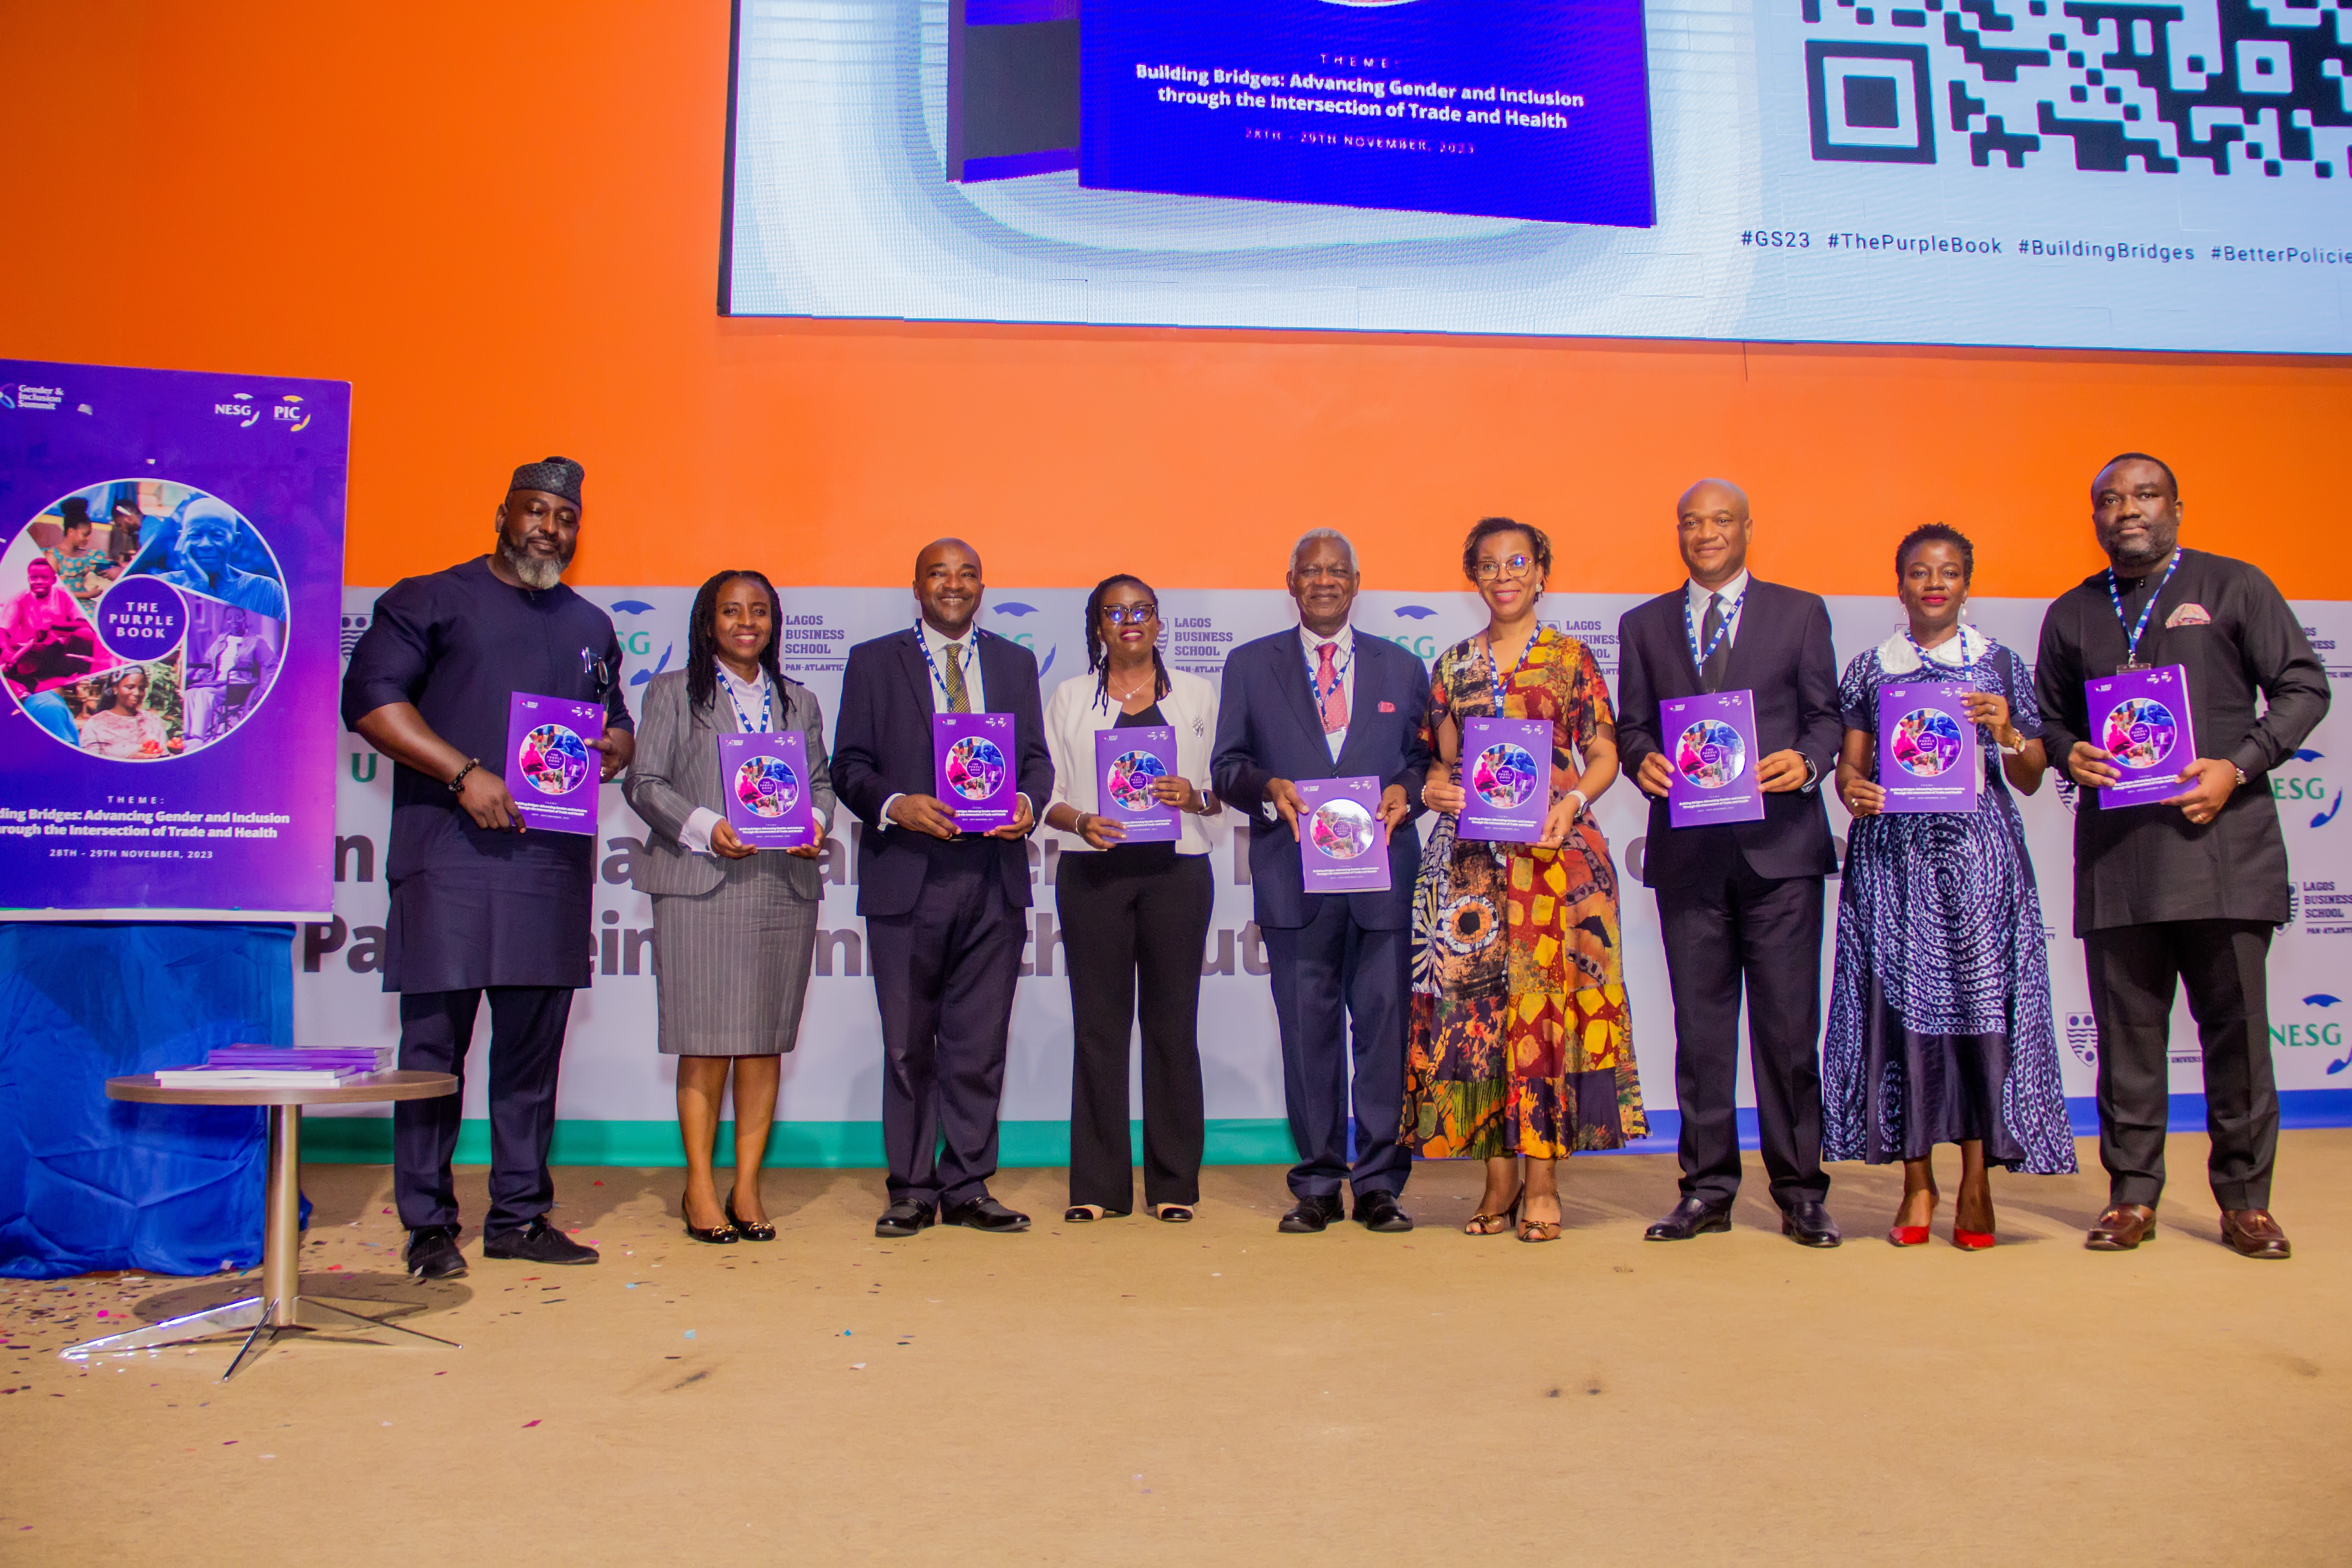 PIC Unveils The Purple Book to Promote Gender Inclusion